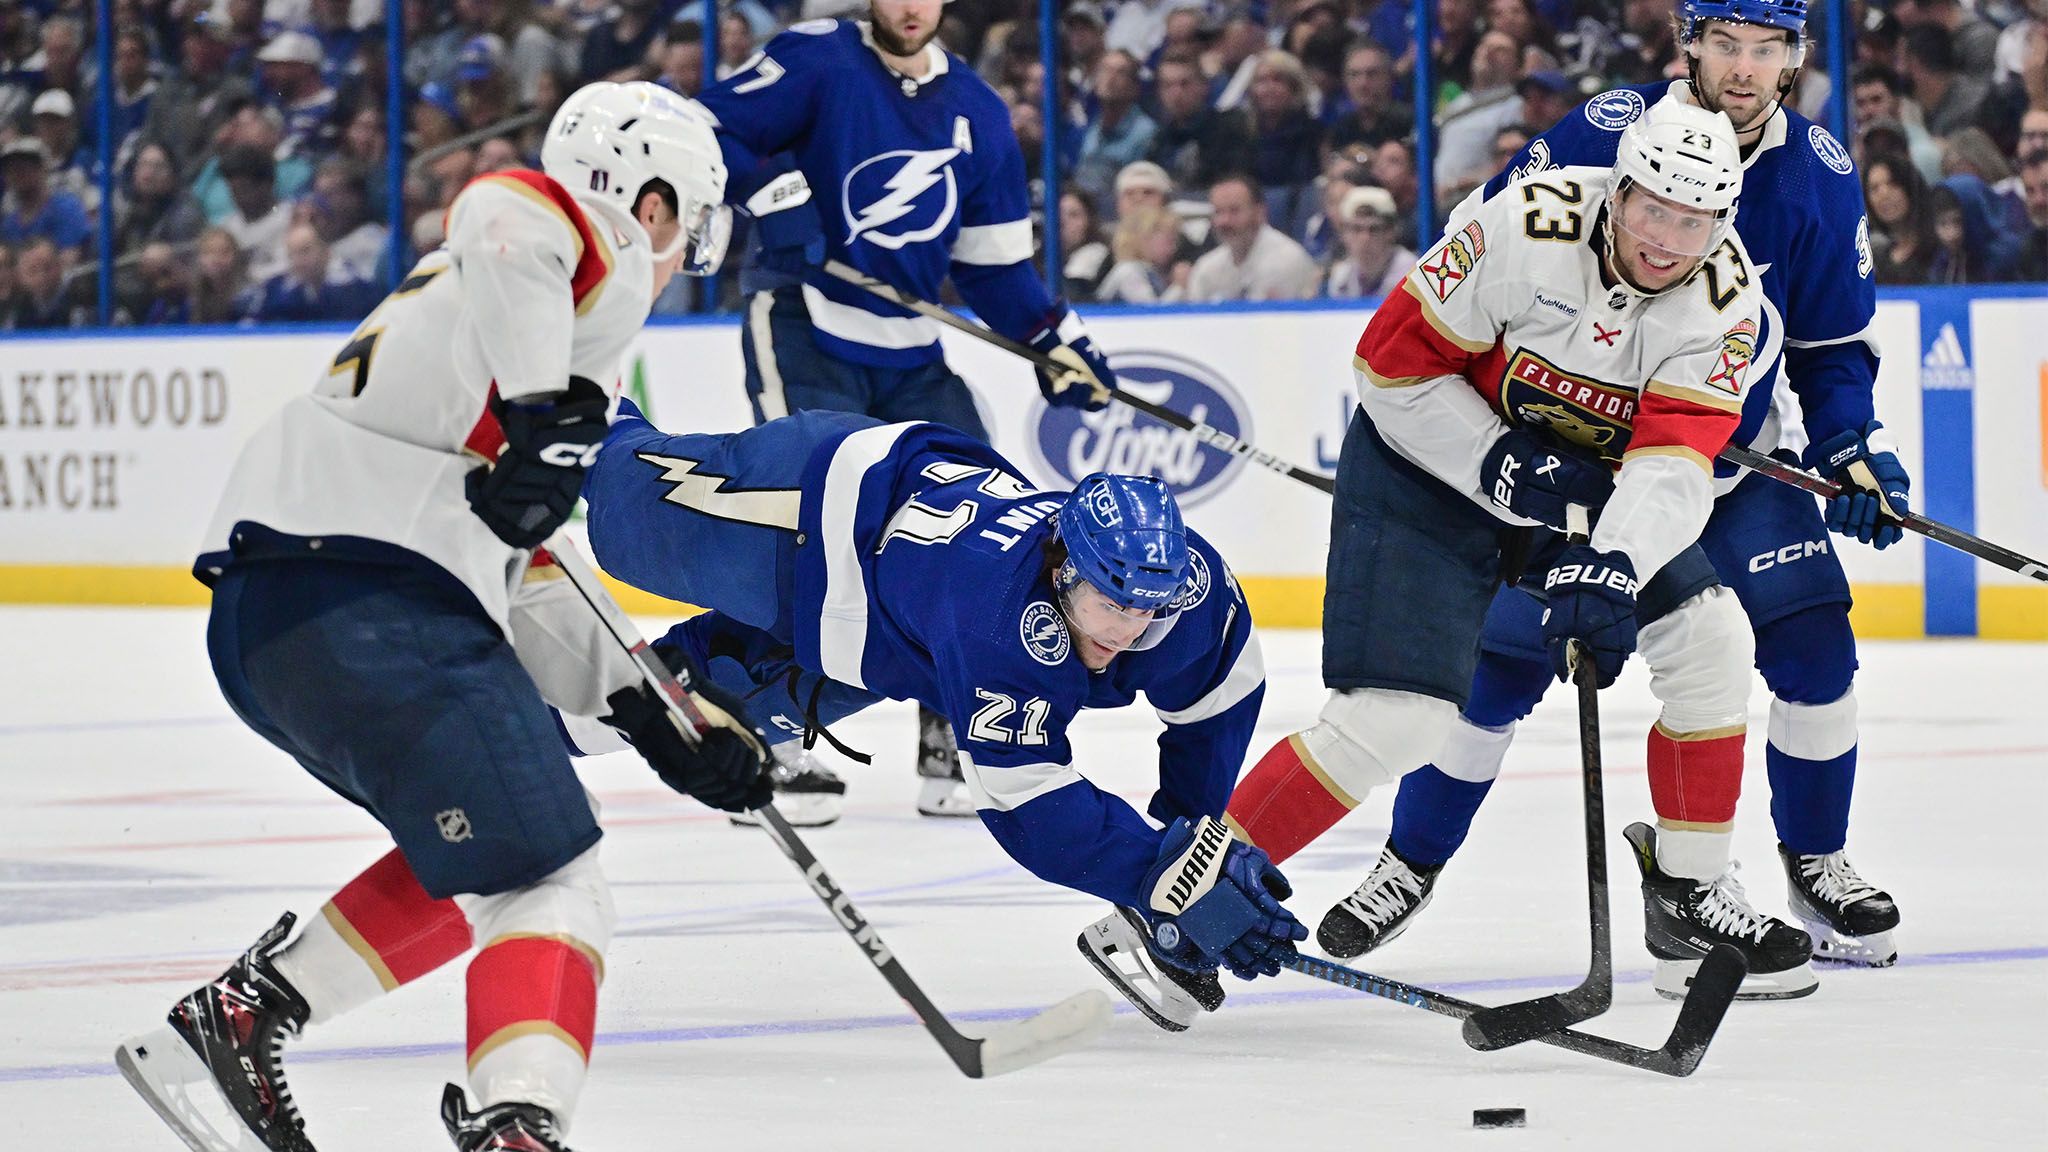  How to watch today's Tampa Bay Lightning vs Florida Panthers NHL Playoffs First Round Game 4: Live stream, TV channel, and start time 